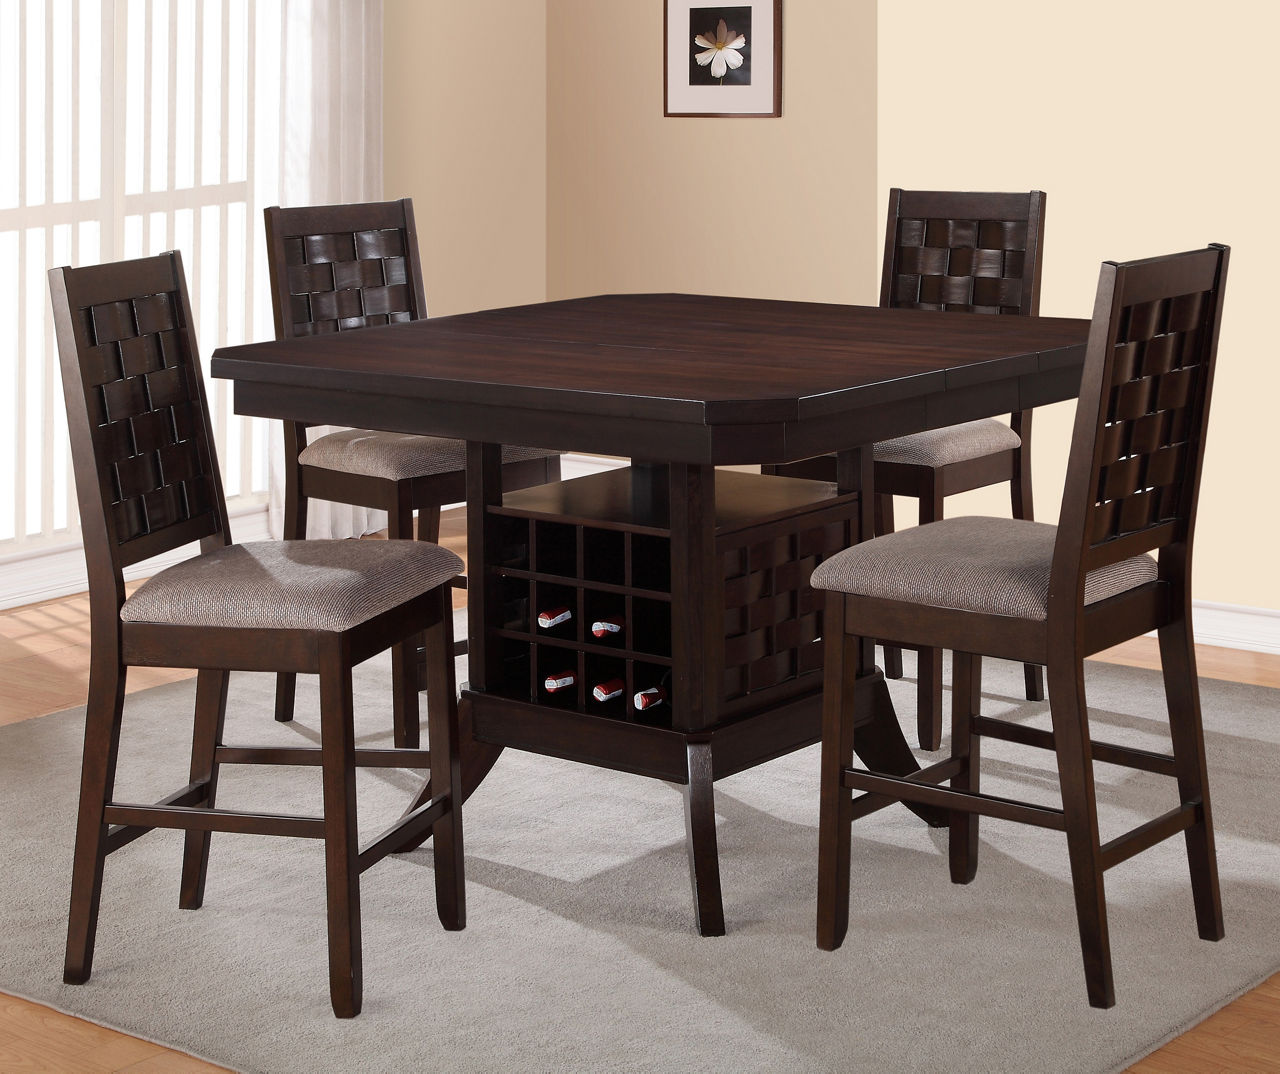 Dining Table With Wine Rack And Chairs